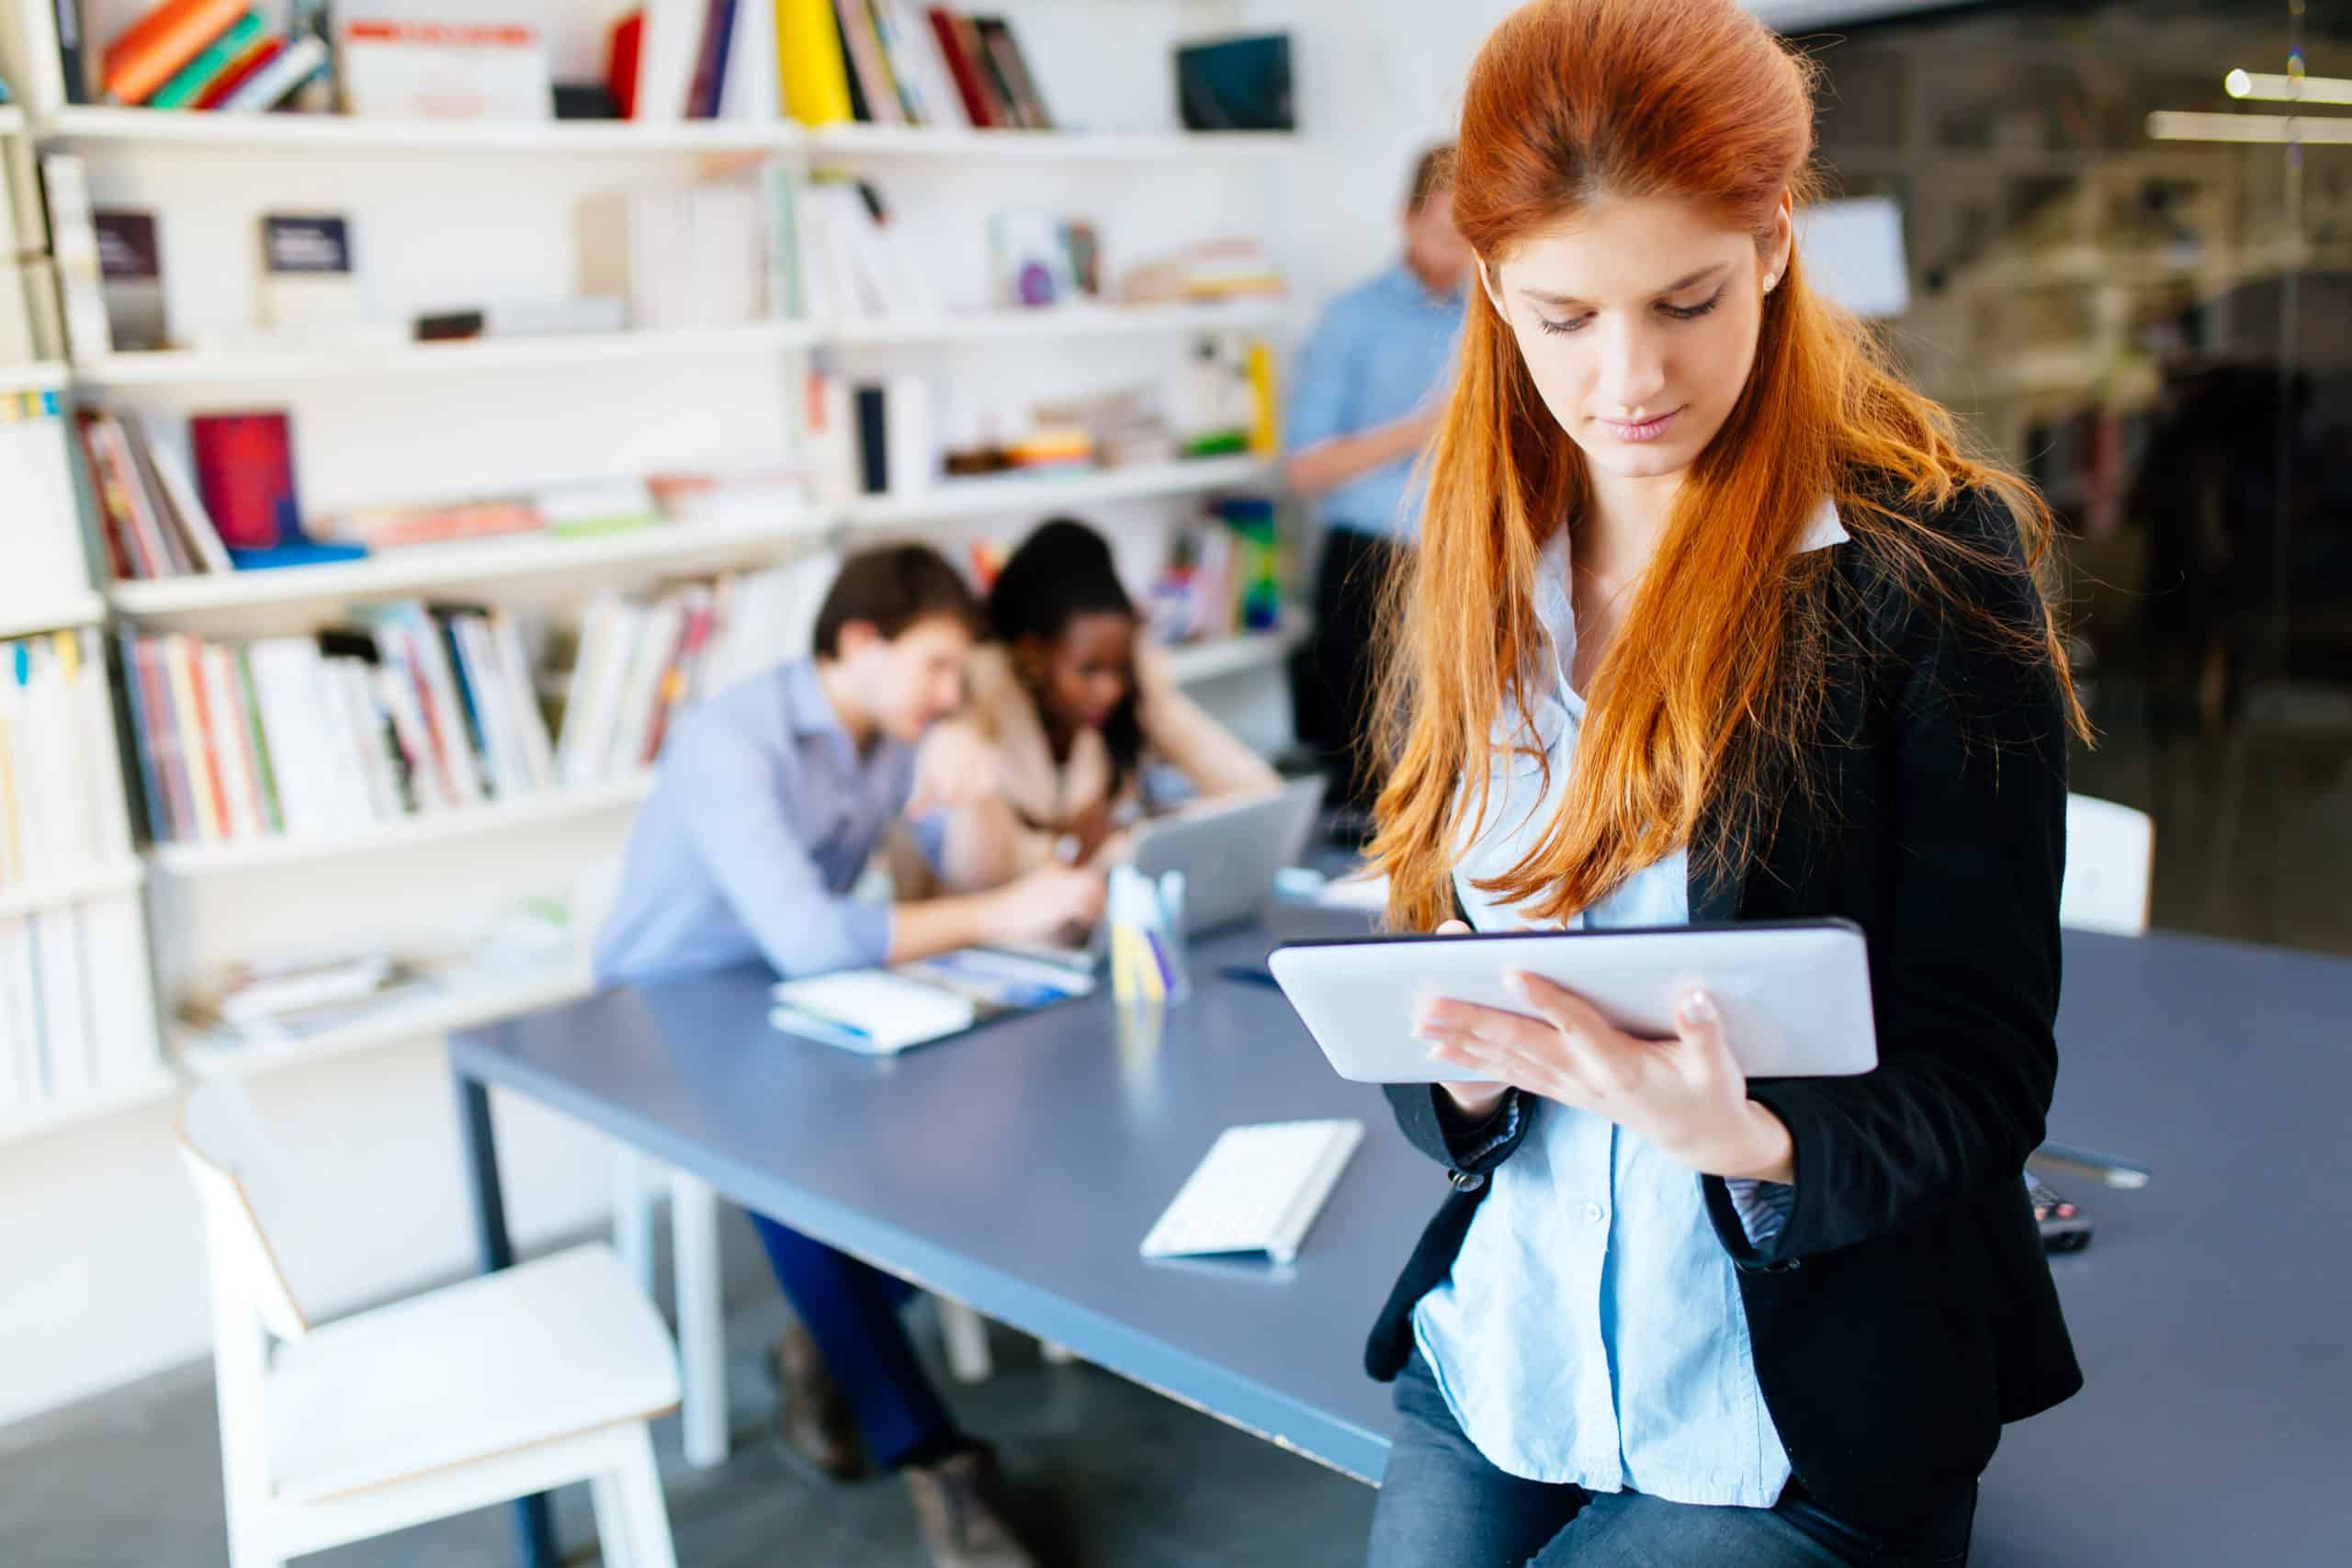 Redhead businesswoman holding a tablet in an office with coworkers communicating in the background